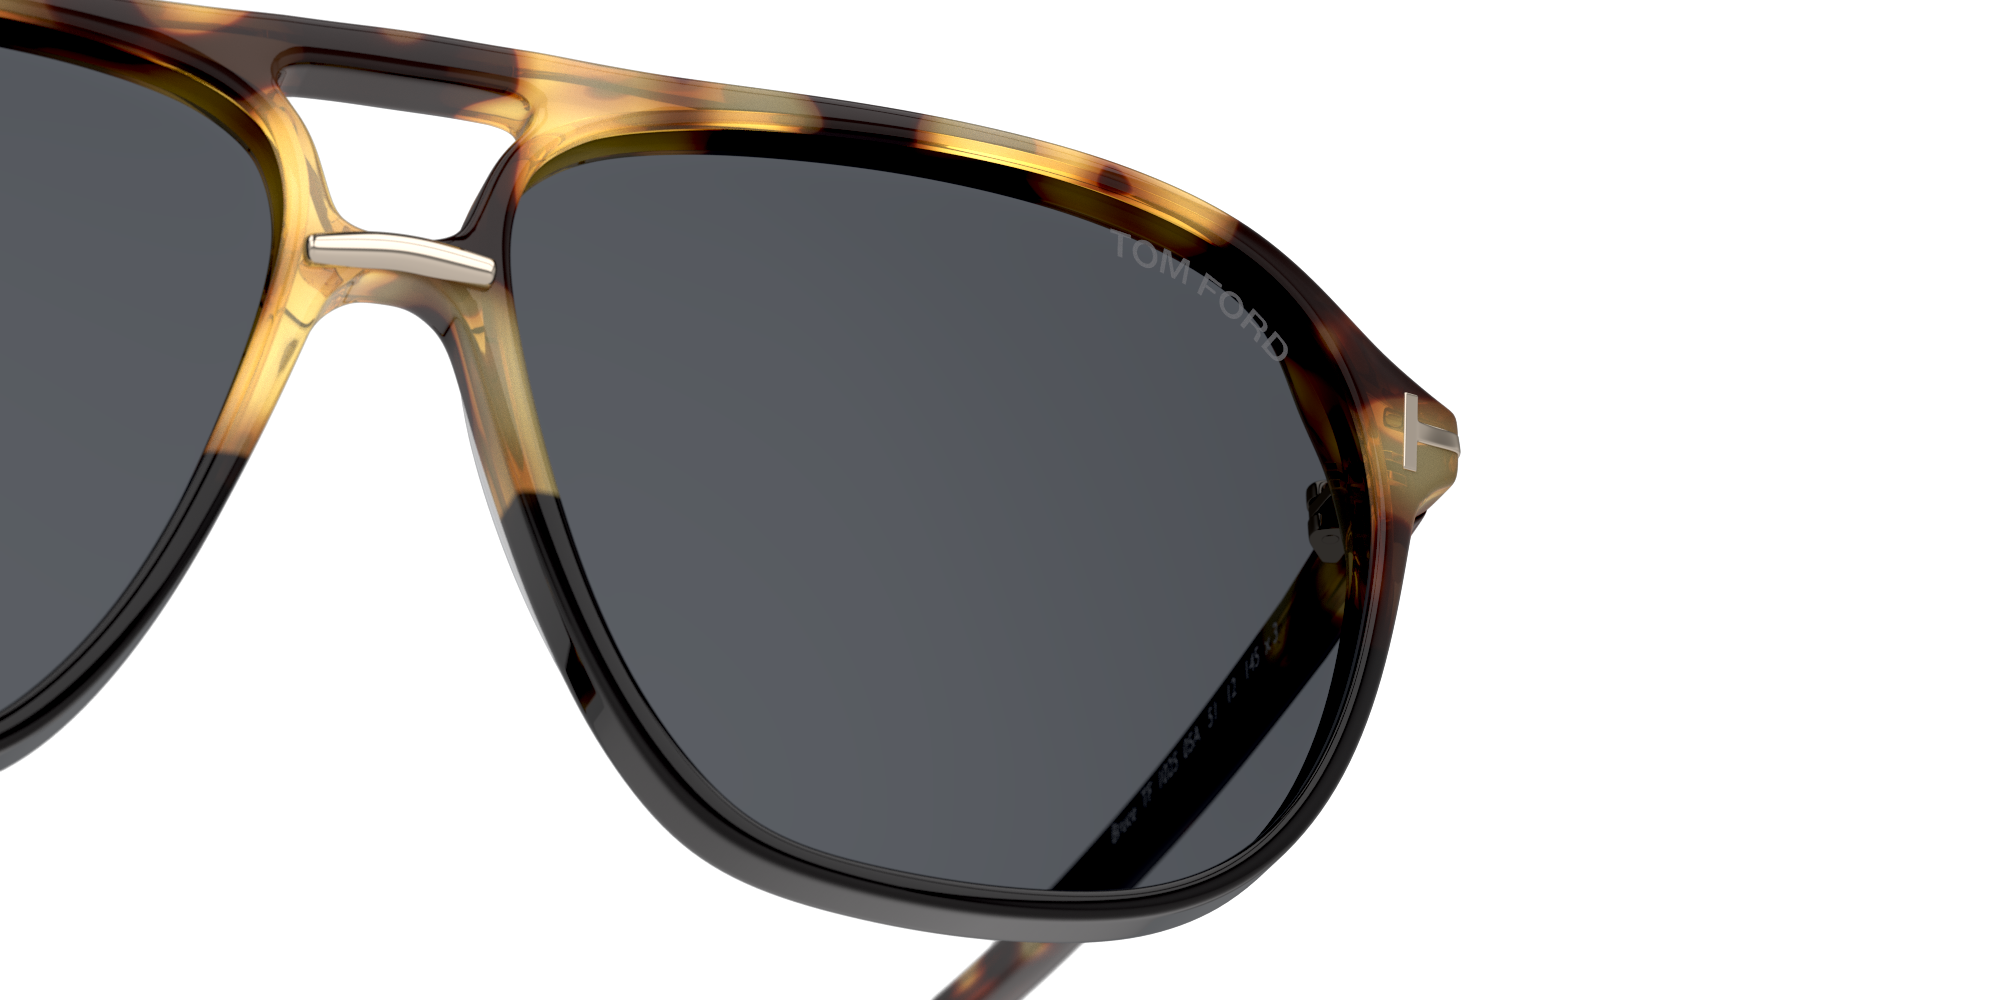 [products.image.detail01] Tom Ford FT1026 05A